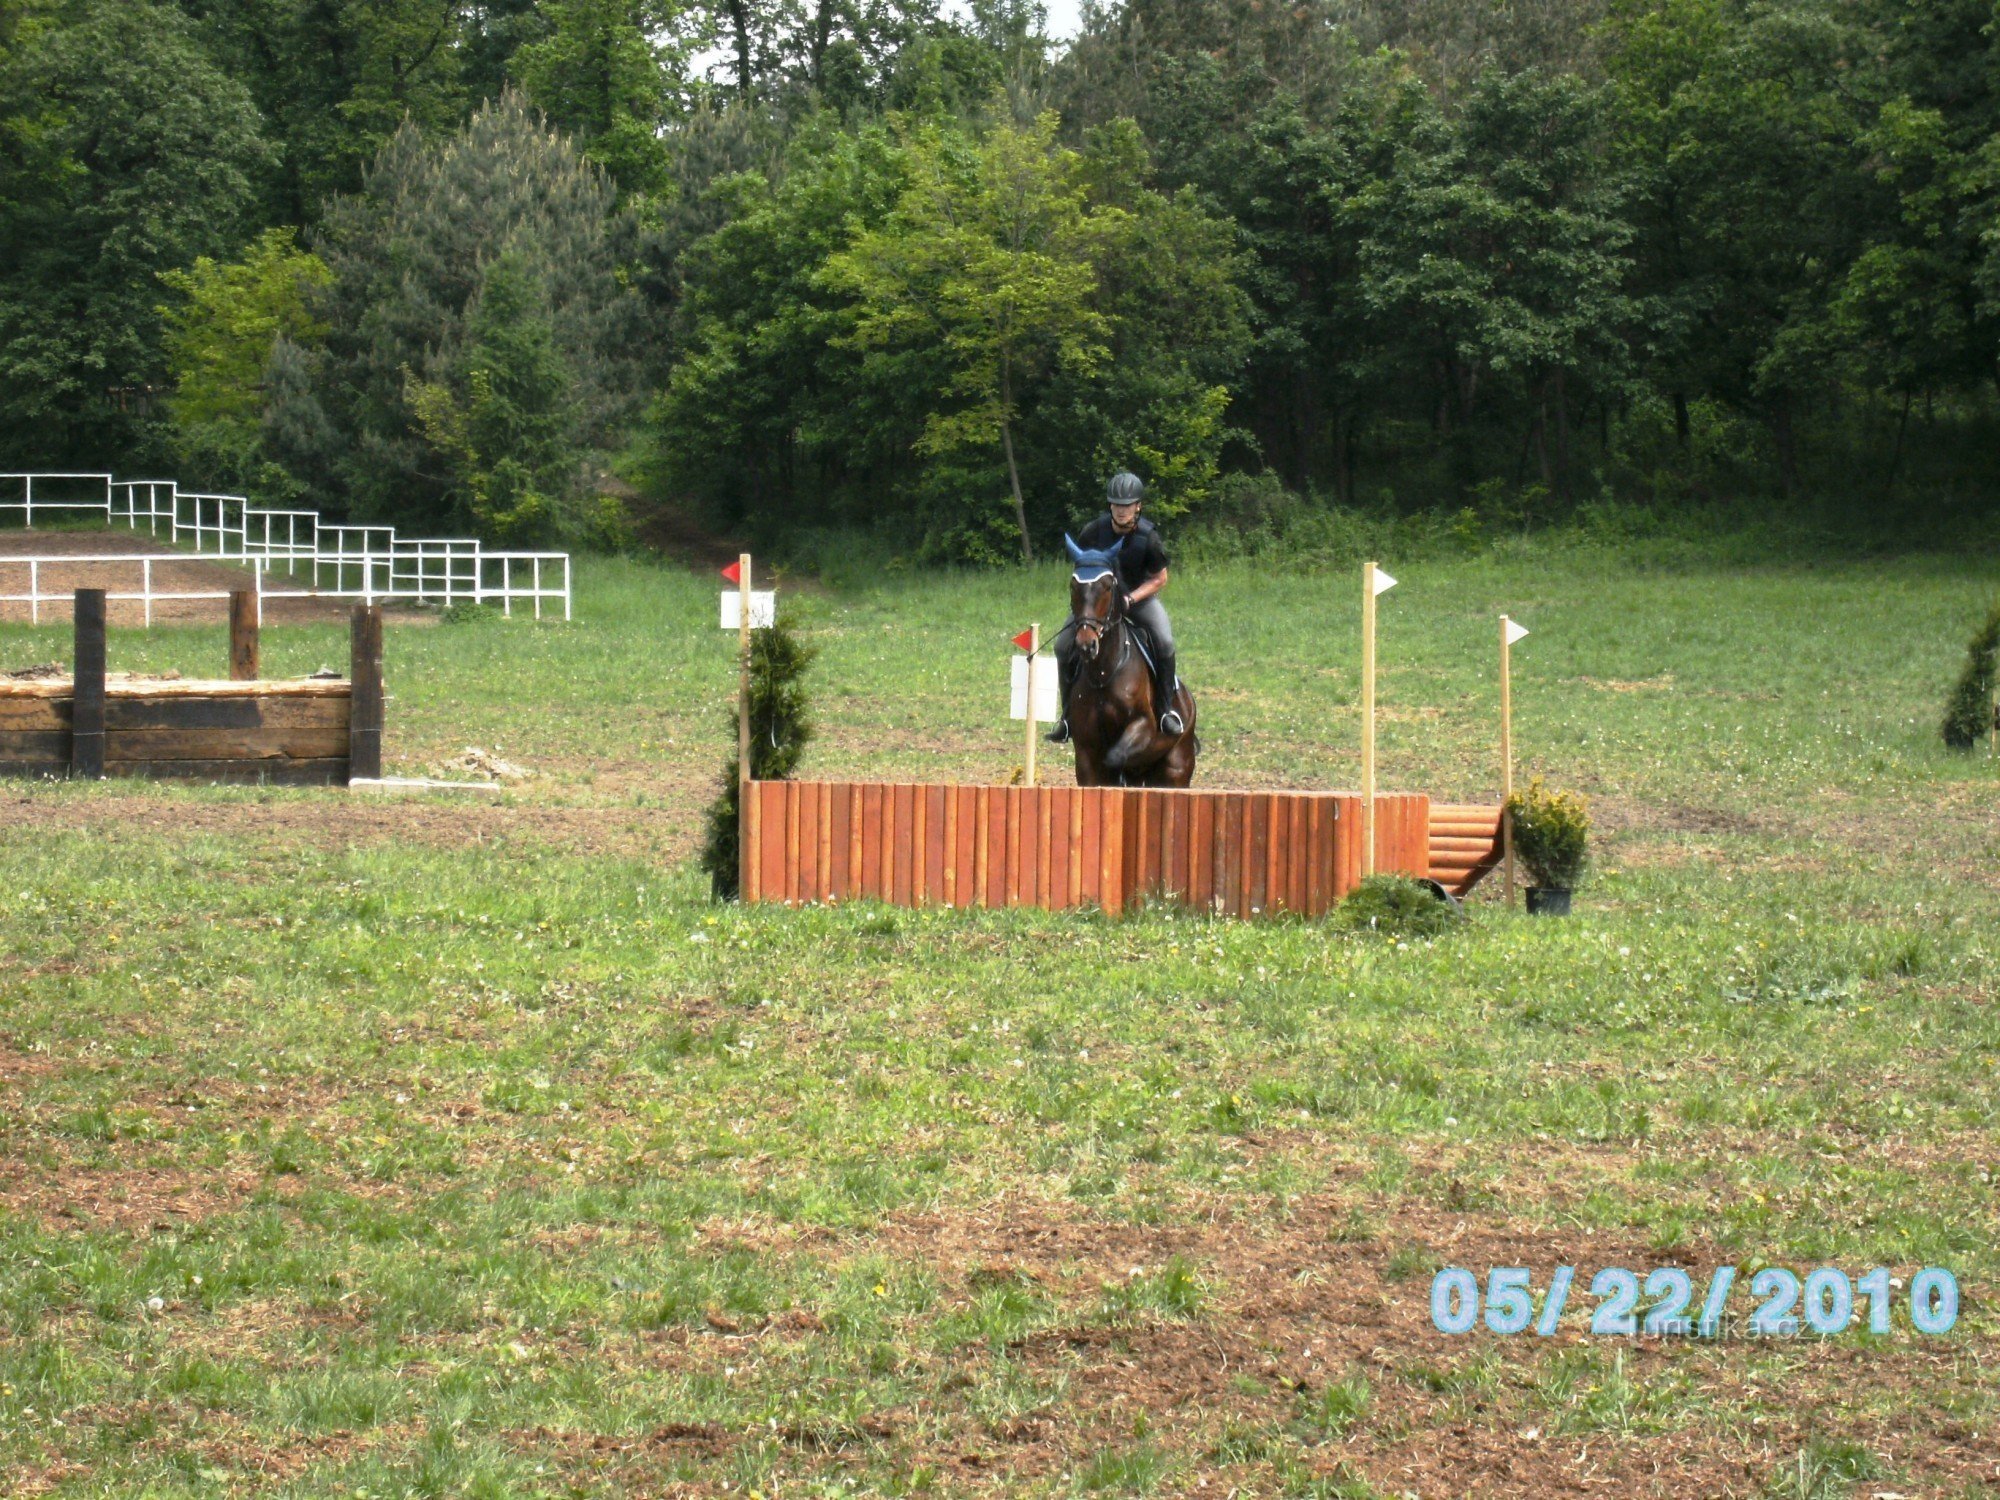 XIII. year of the International Championship of the Police of the Czech Republic in horse riding in the Panská lícha complex